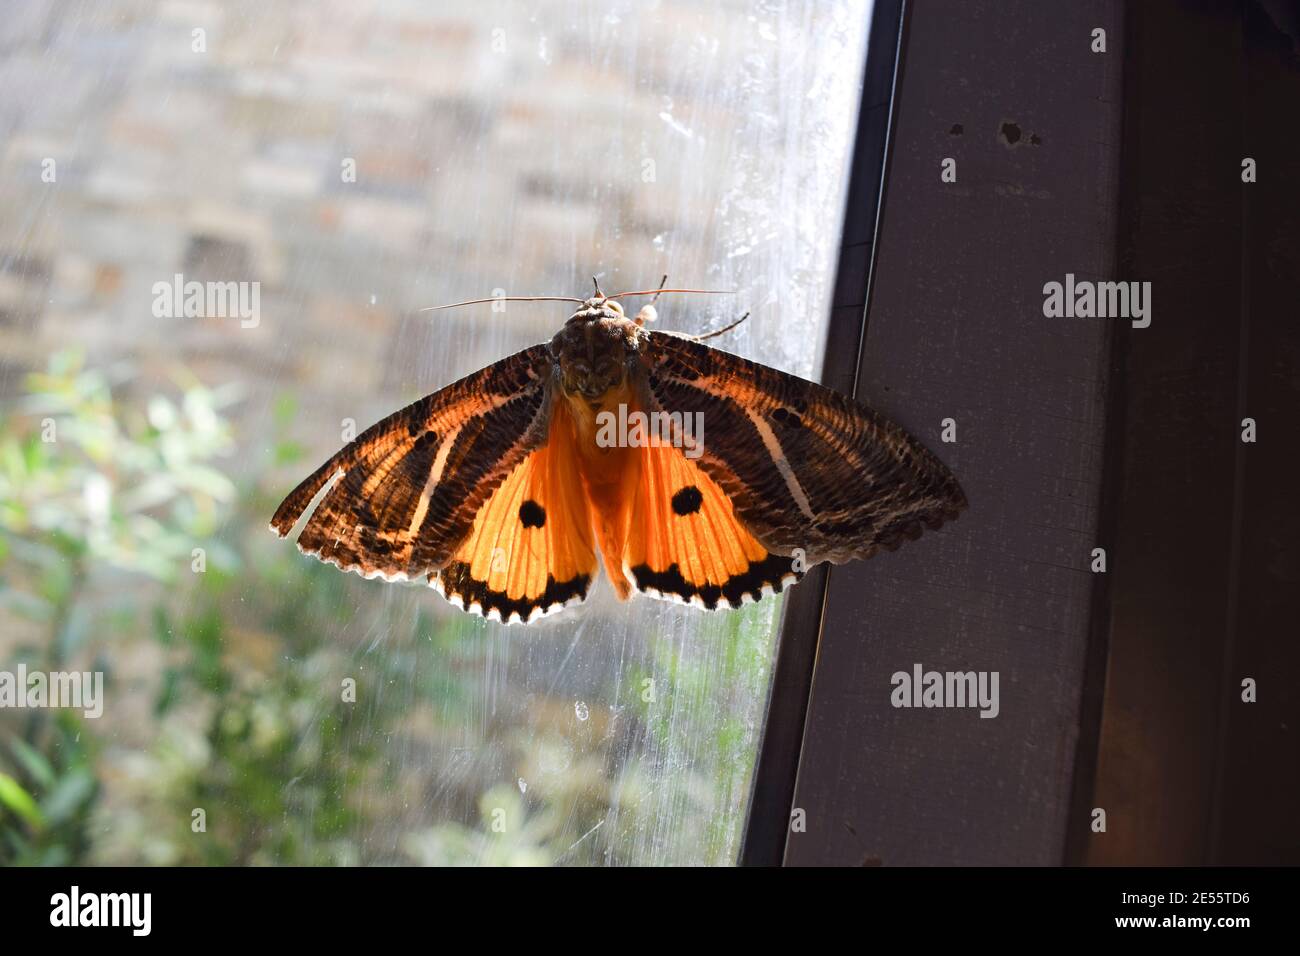 Eudocima materna Indian butterfly , Eudocima apta orange moth butterfly. nocturnal orange butterfly with black stripes and dots and white design patte Stock Photo